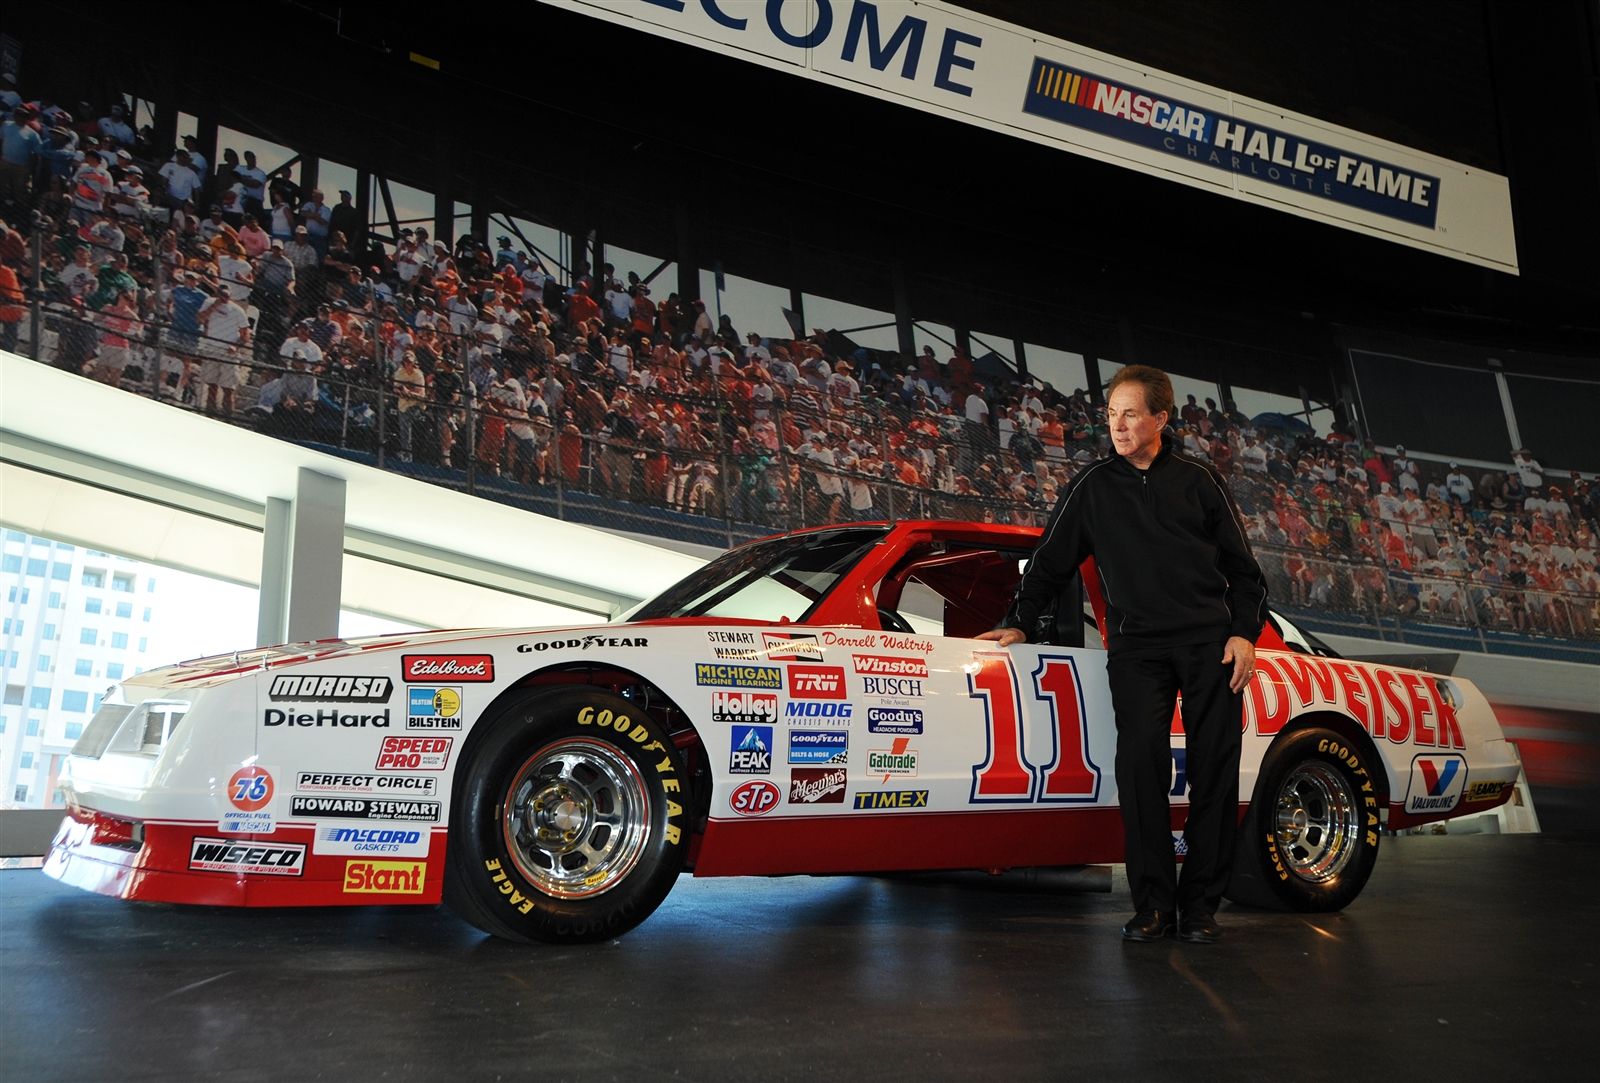 Waltrip in the Hall of Fame